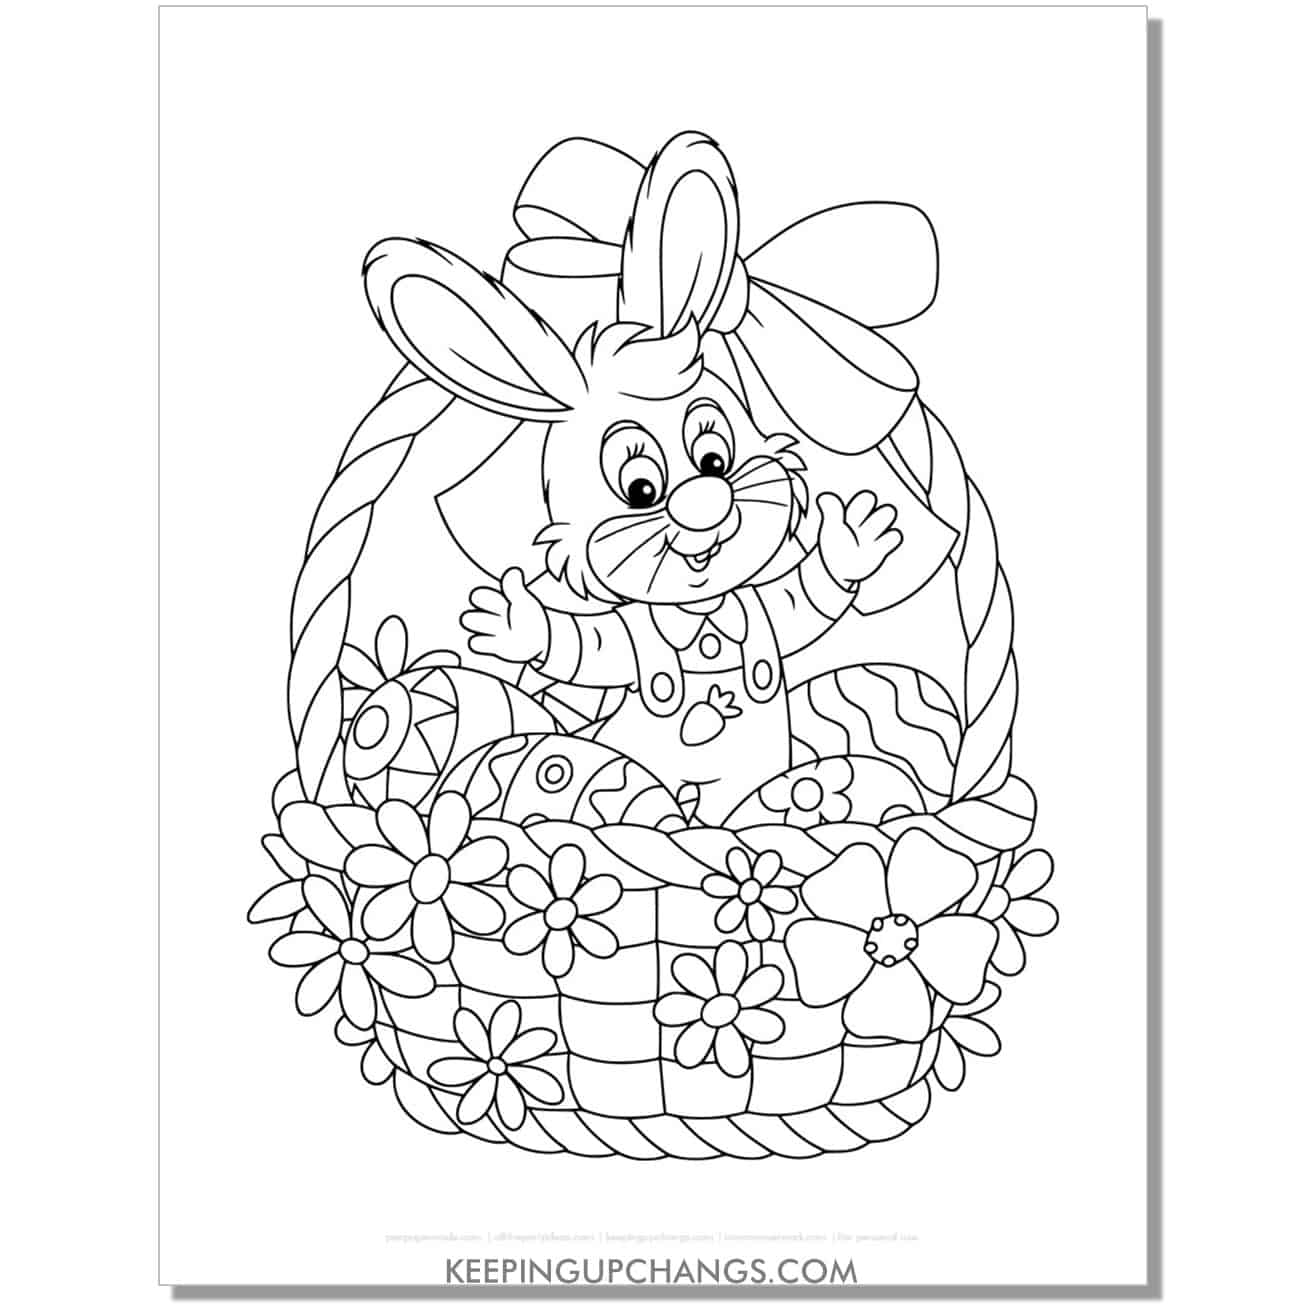 Easter bunny in overalls sitting in woven Easter basket with eggs, flowers coloring page, sheet.